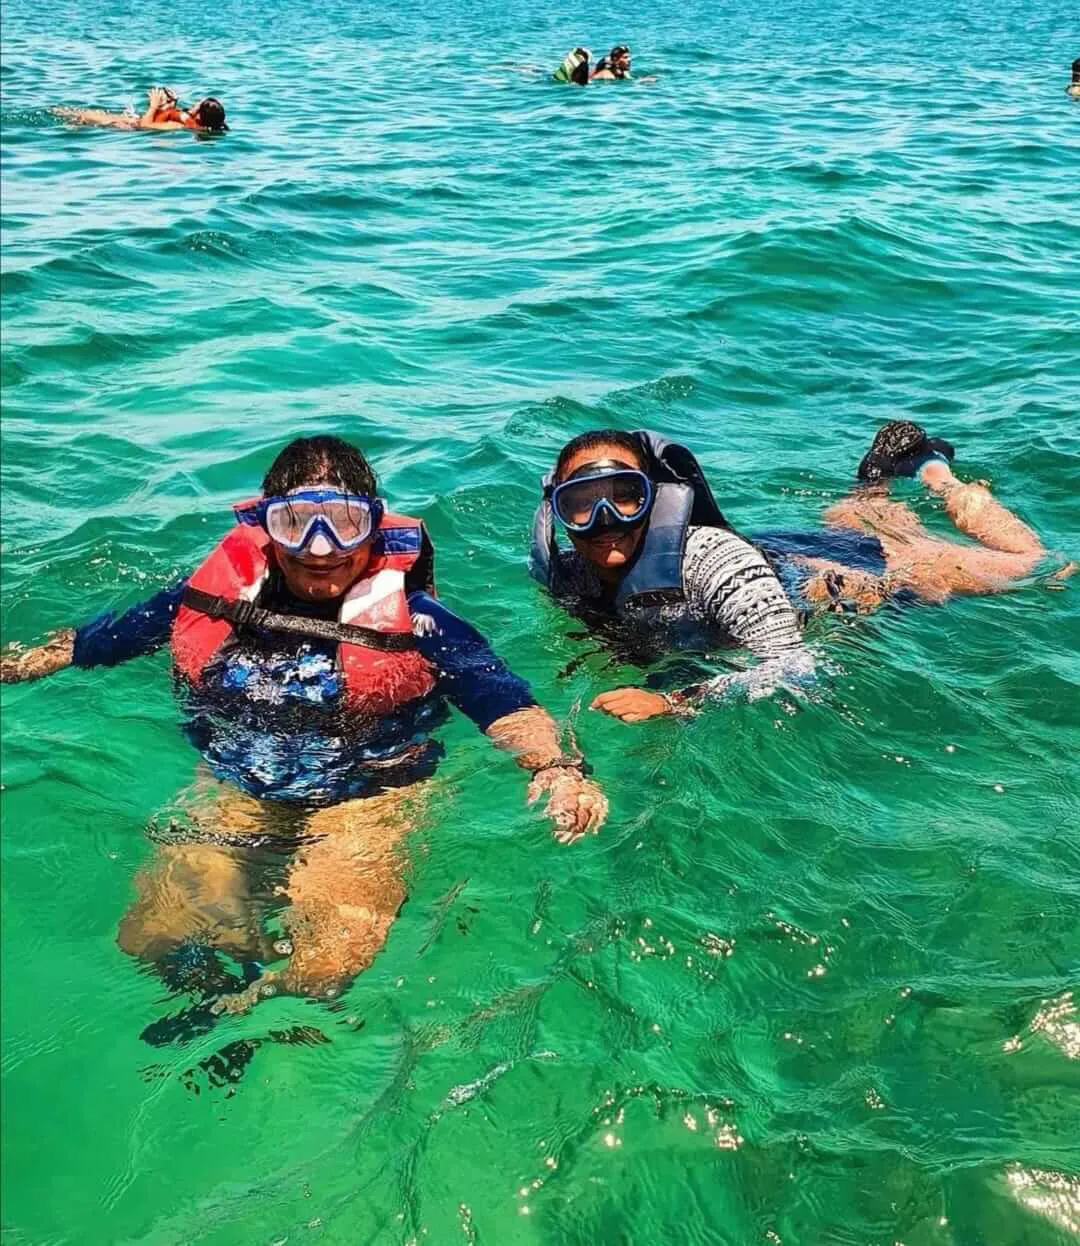 Two snorkeler girls smiling at the camera swimming among other snorkelers